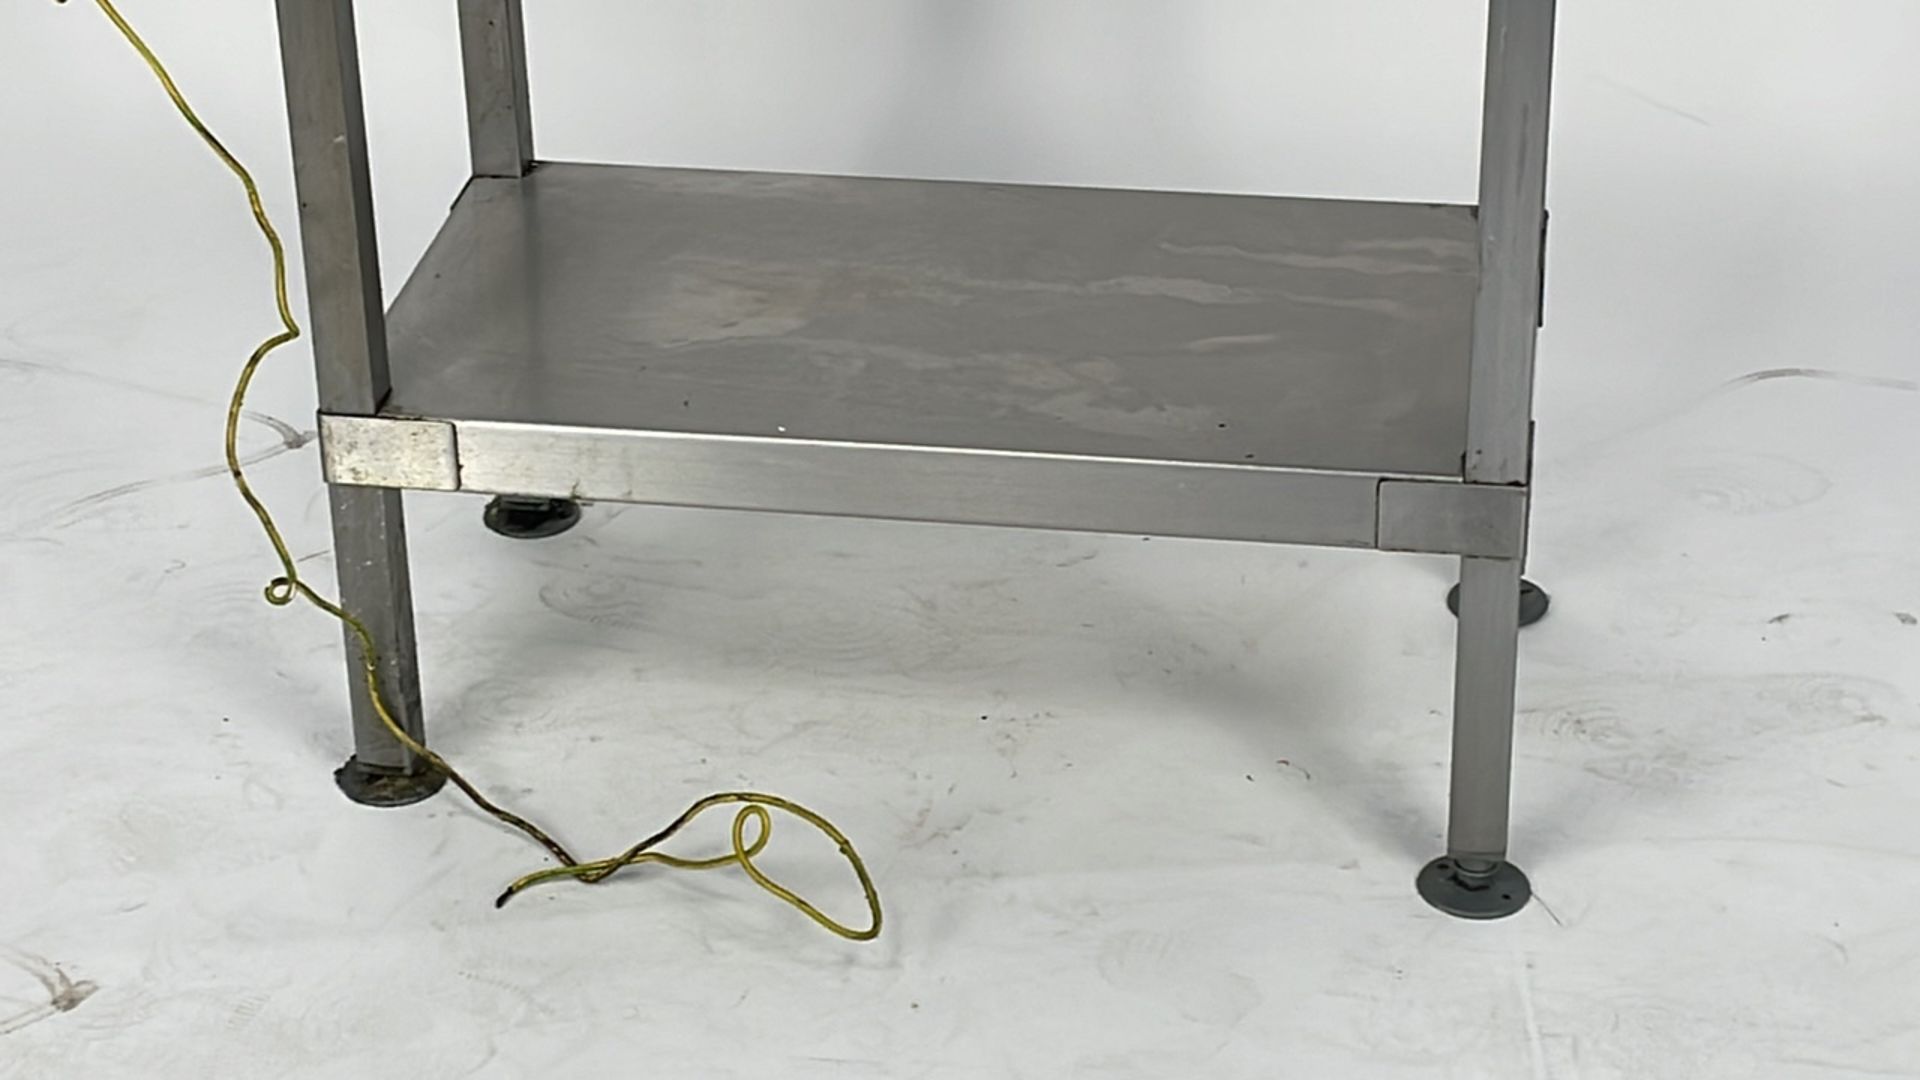 Stainless steel prep table - Image 3 of 3